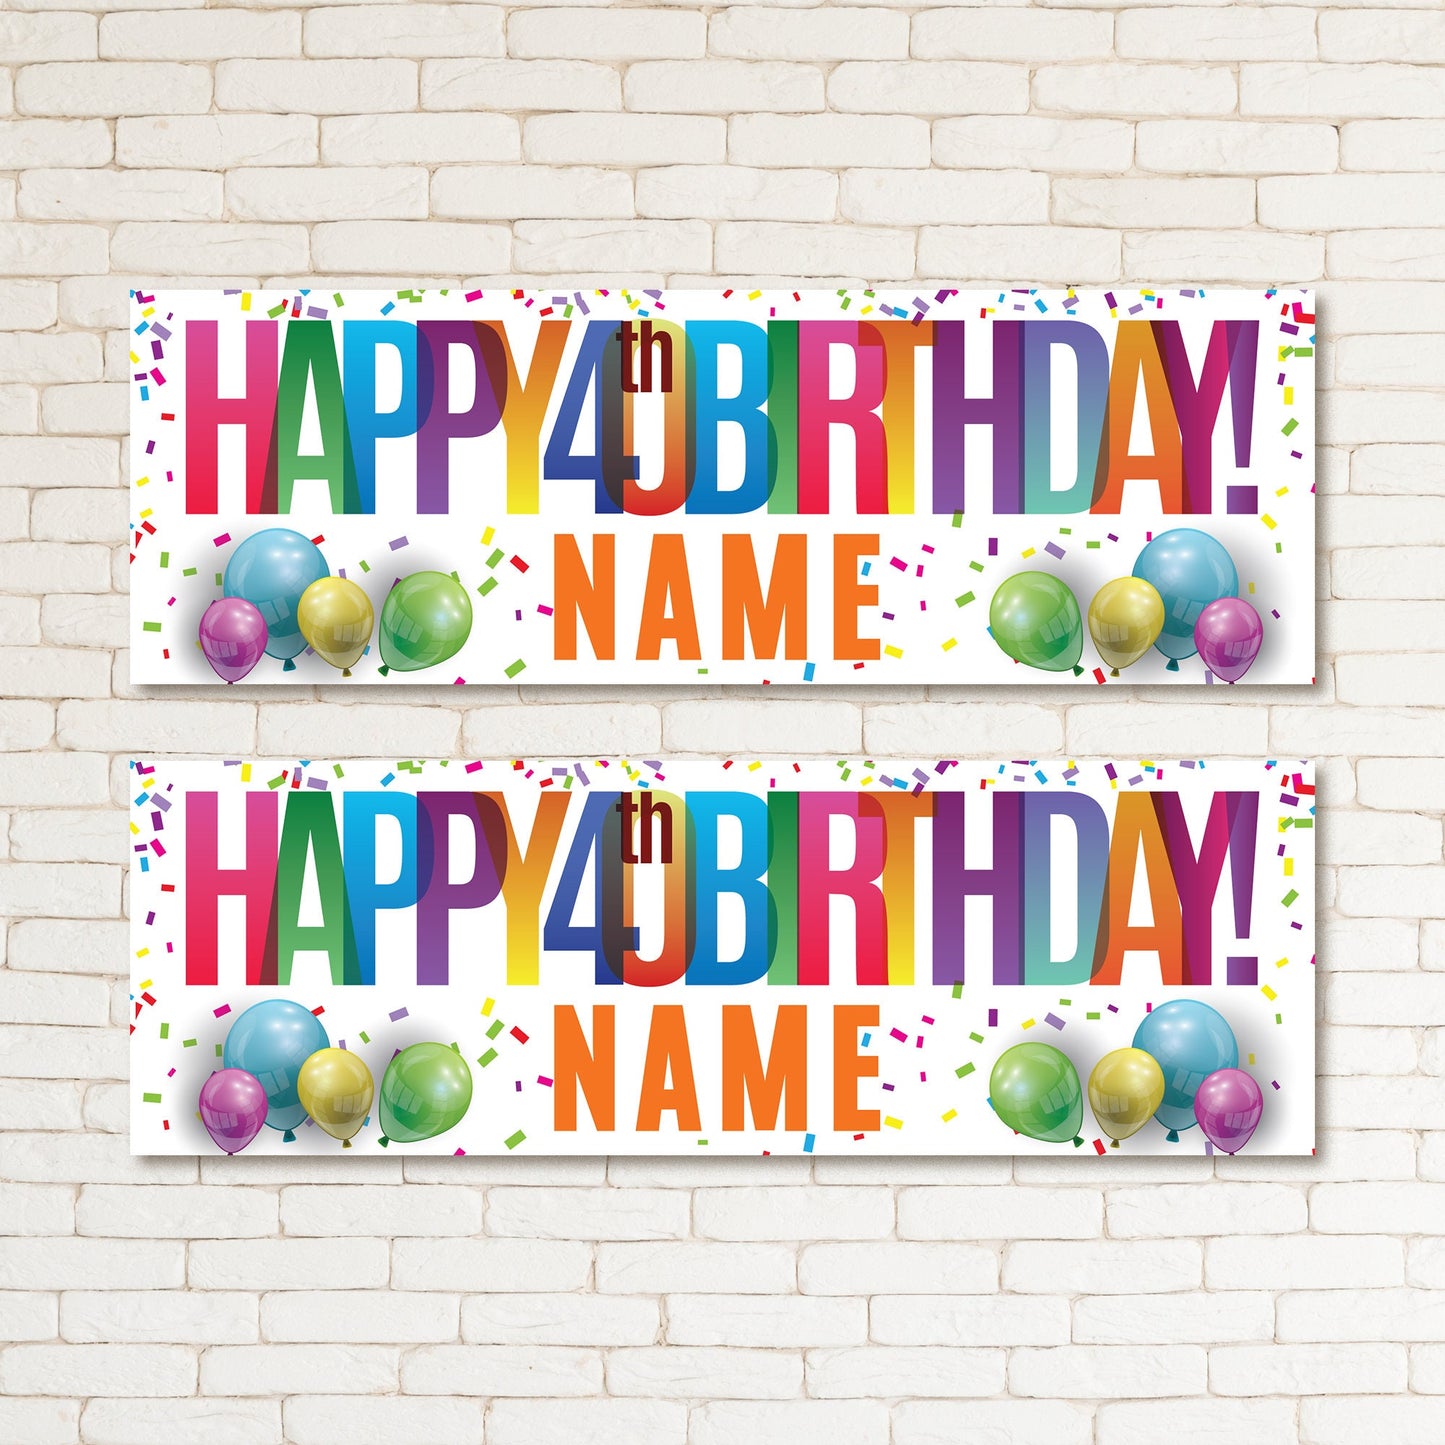 Set of 2 Personalised Party Multicoloured Rainbow 40TH Birthday Party Banner Event Wall Decor